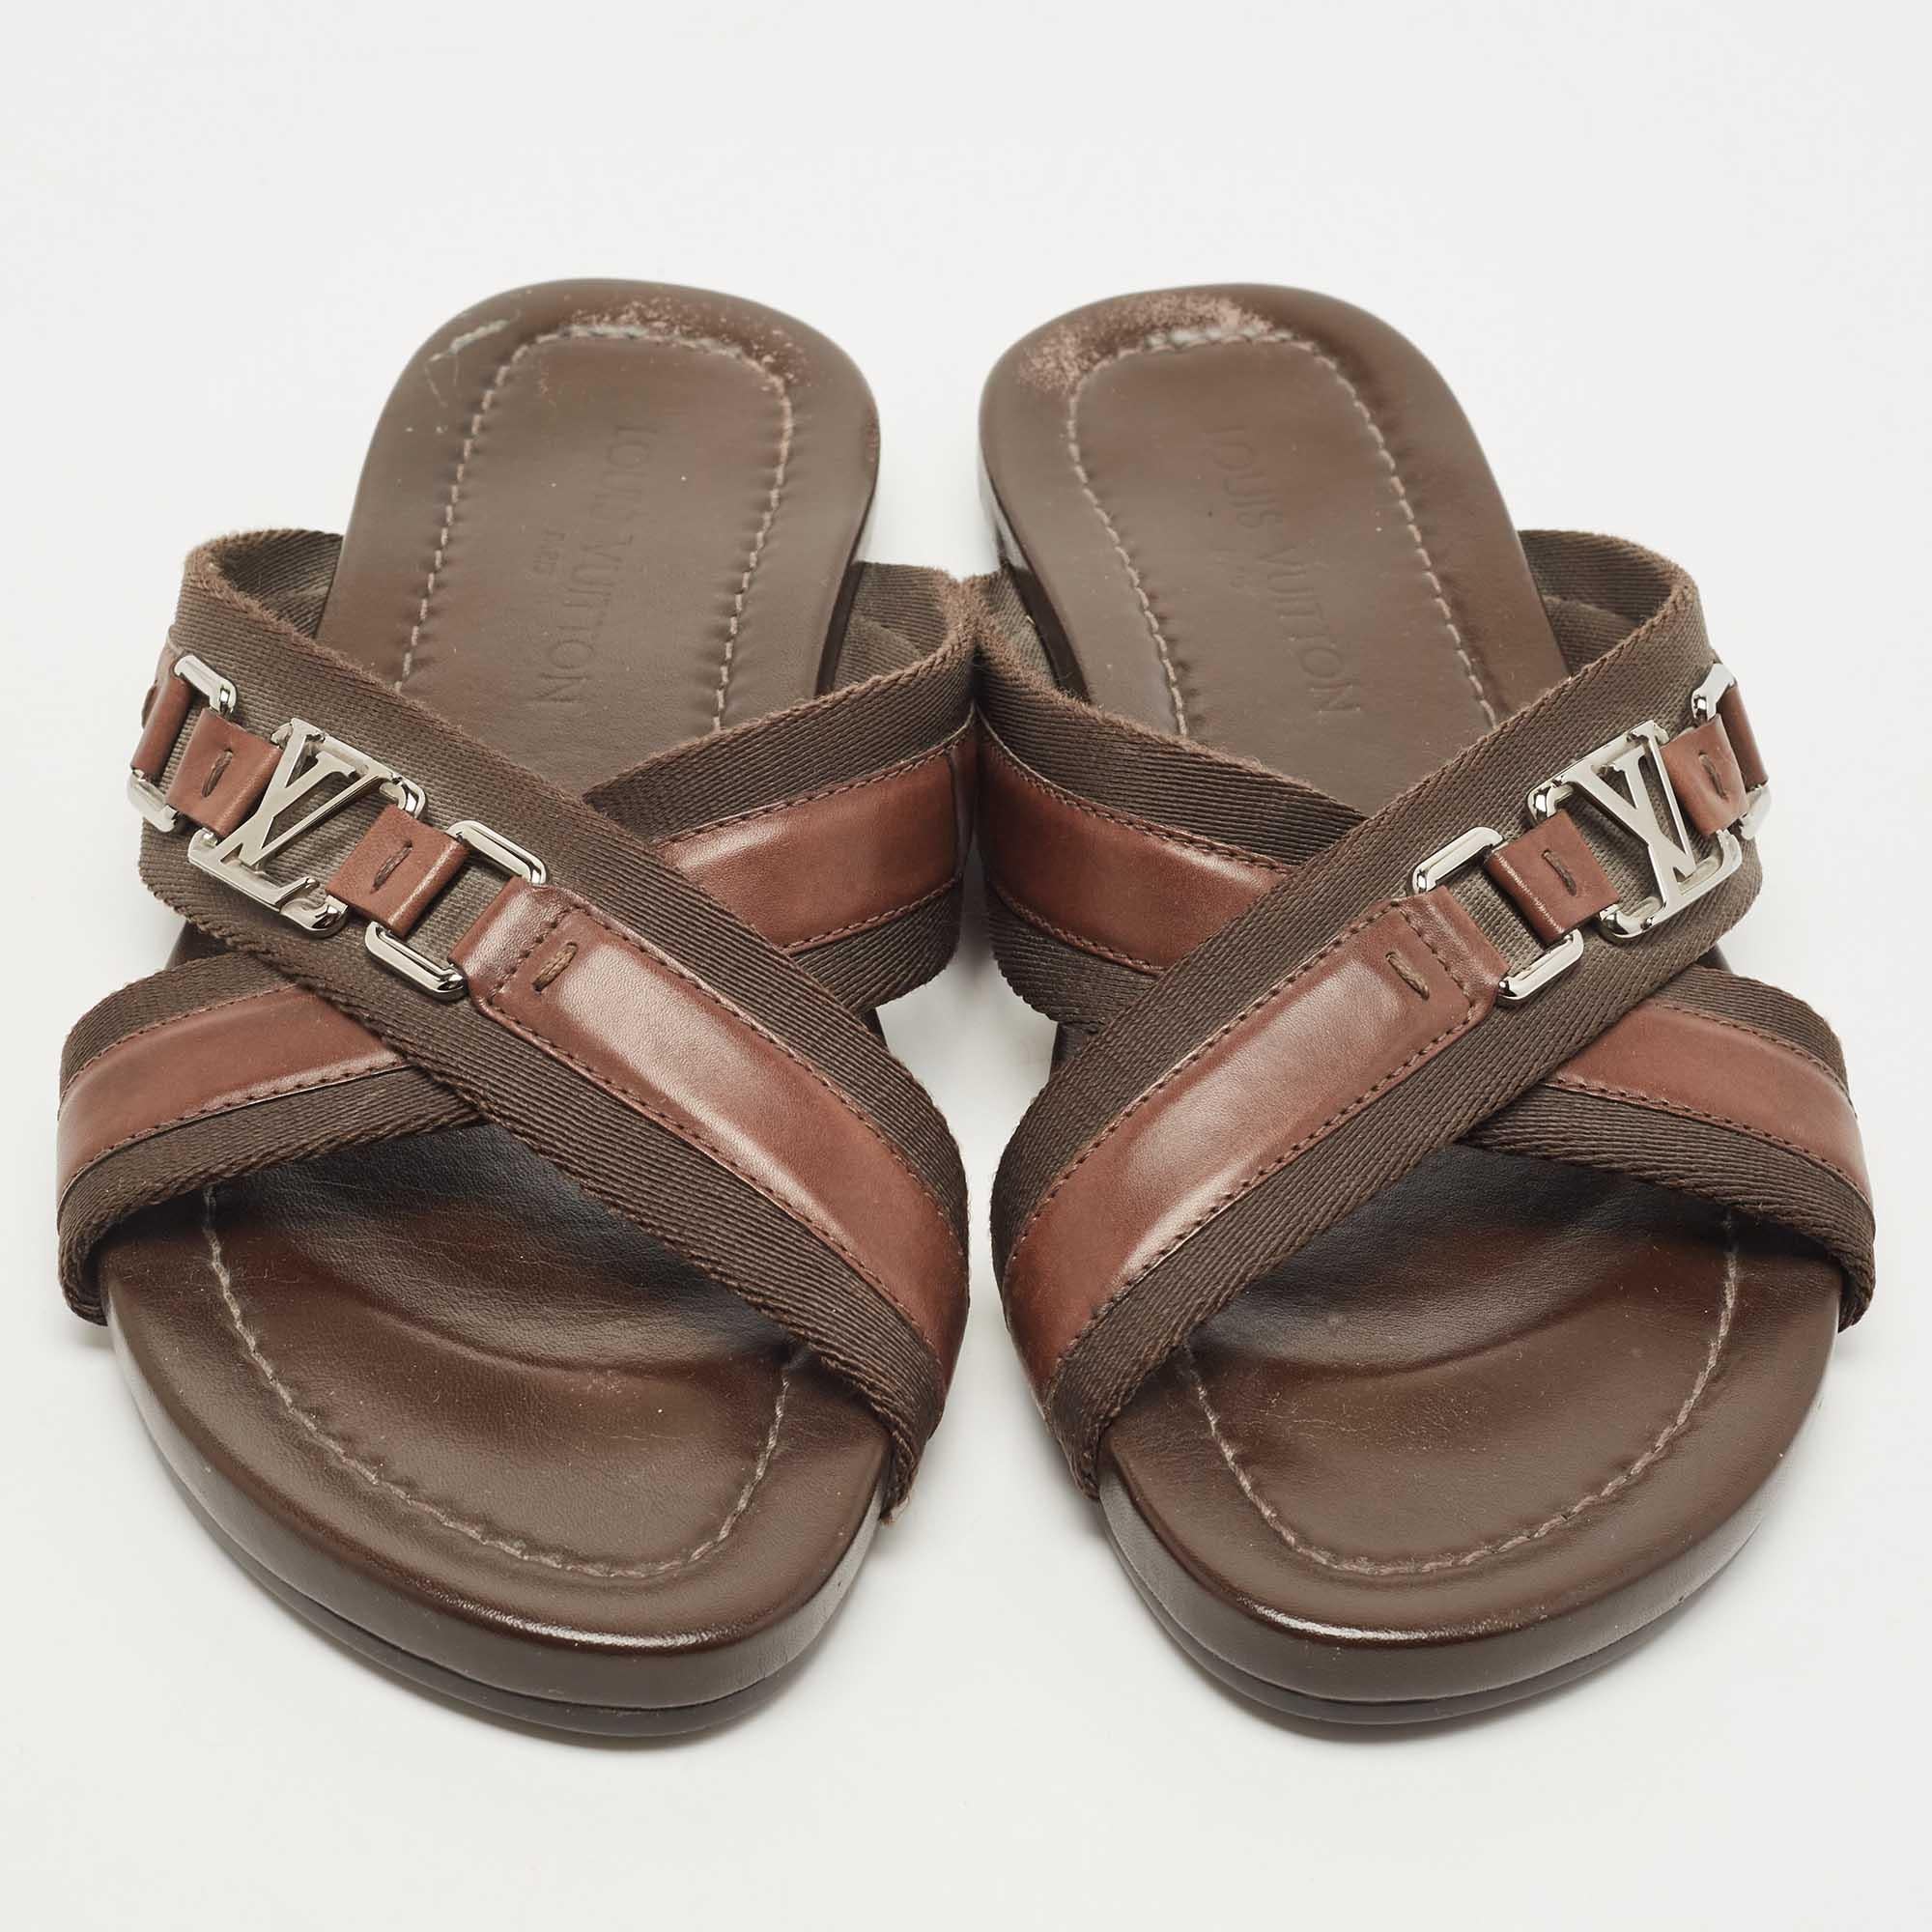 Comfort and fashion will always go hand in hand when you step out in these splendid slides from Louis Vuitton. Two fabric straps are laid in a crisscross manner and detailed with leather and gunmetal-tone LV accents. Comfortable leather lined